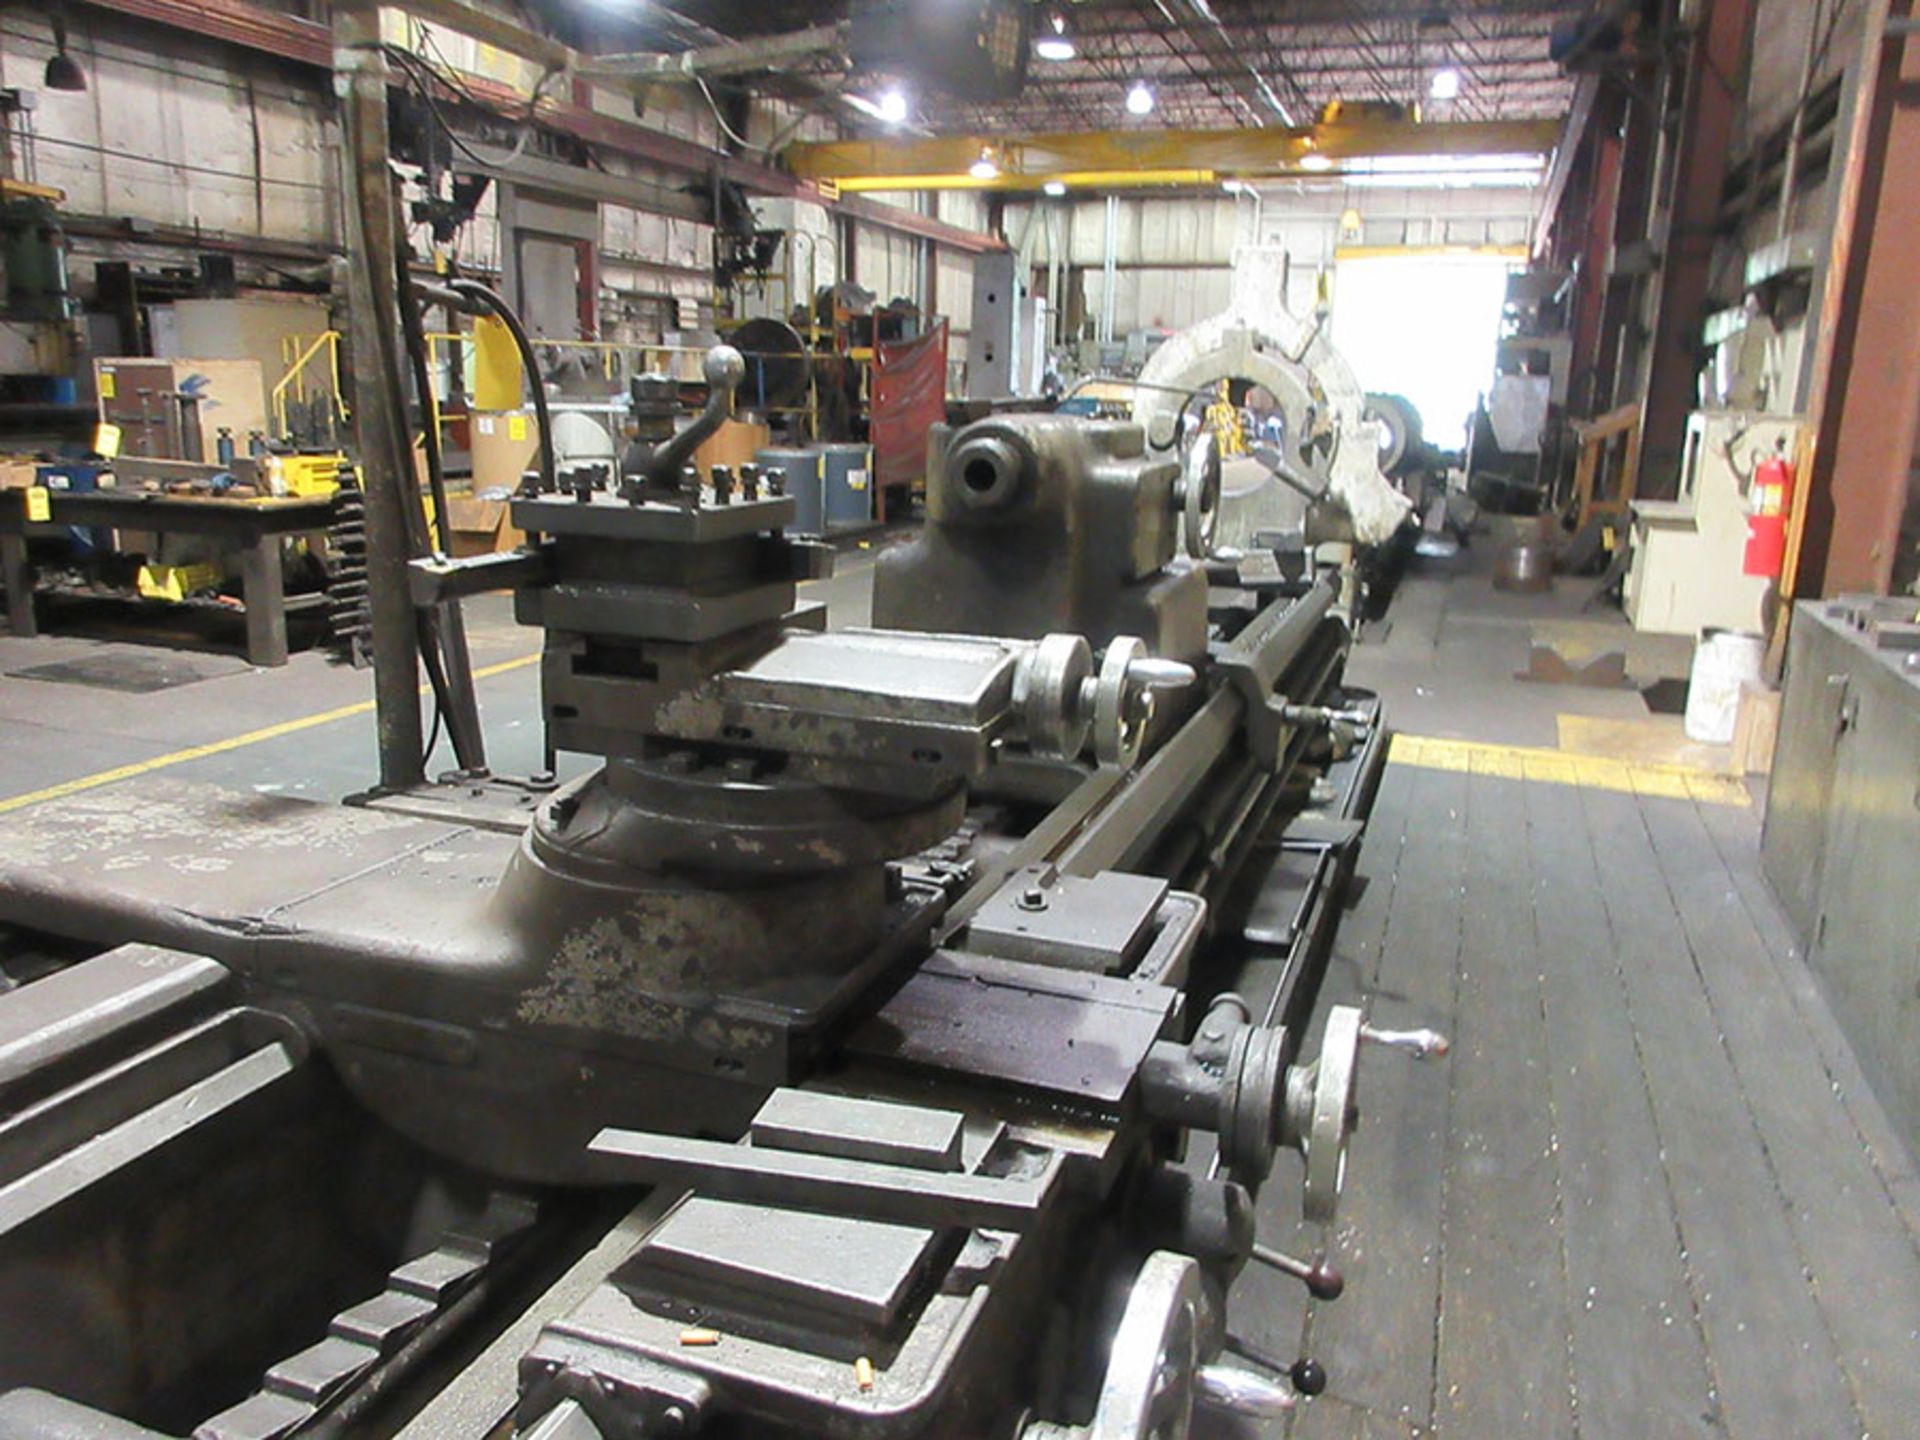 AXELSON GAP BED ENGINE LATHE; 20' BED, 6-750 RPM, SADDLE, SLIDEWAY, TOOL POST, TAILSTOCK, (2) STEADY - Image 2 of 4